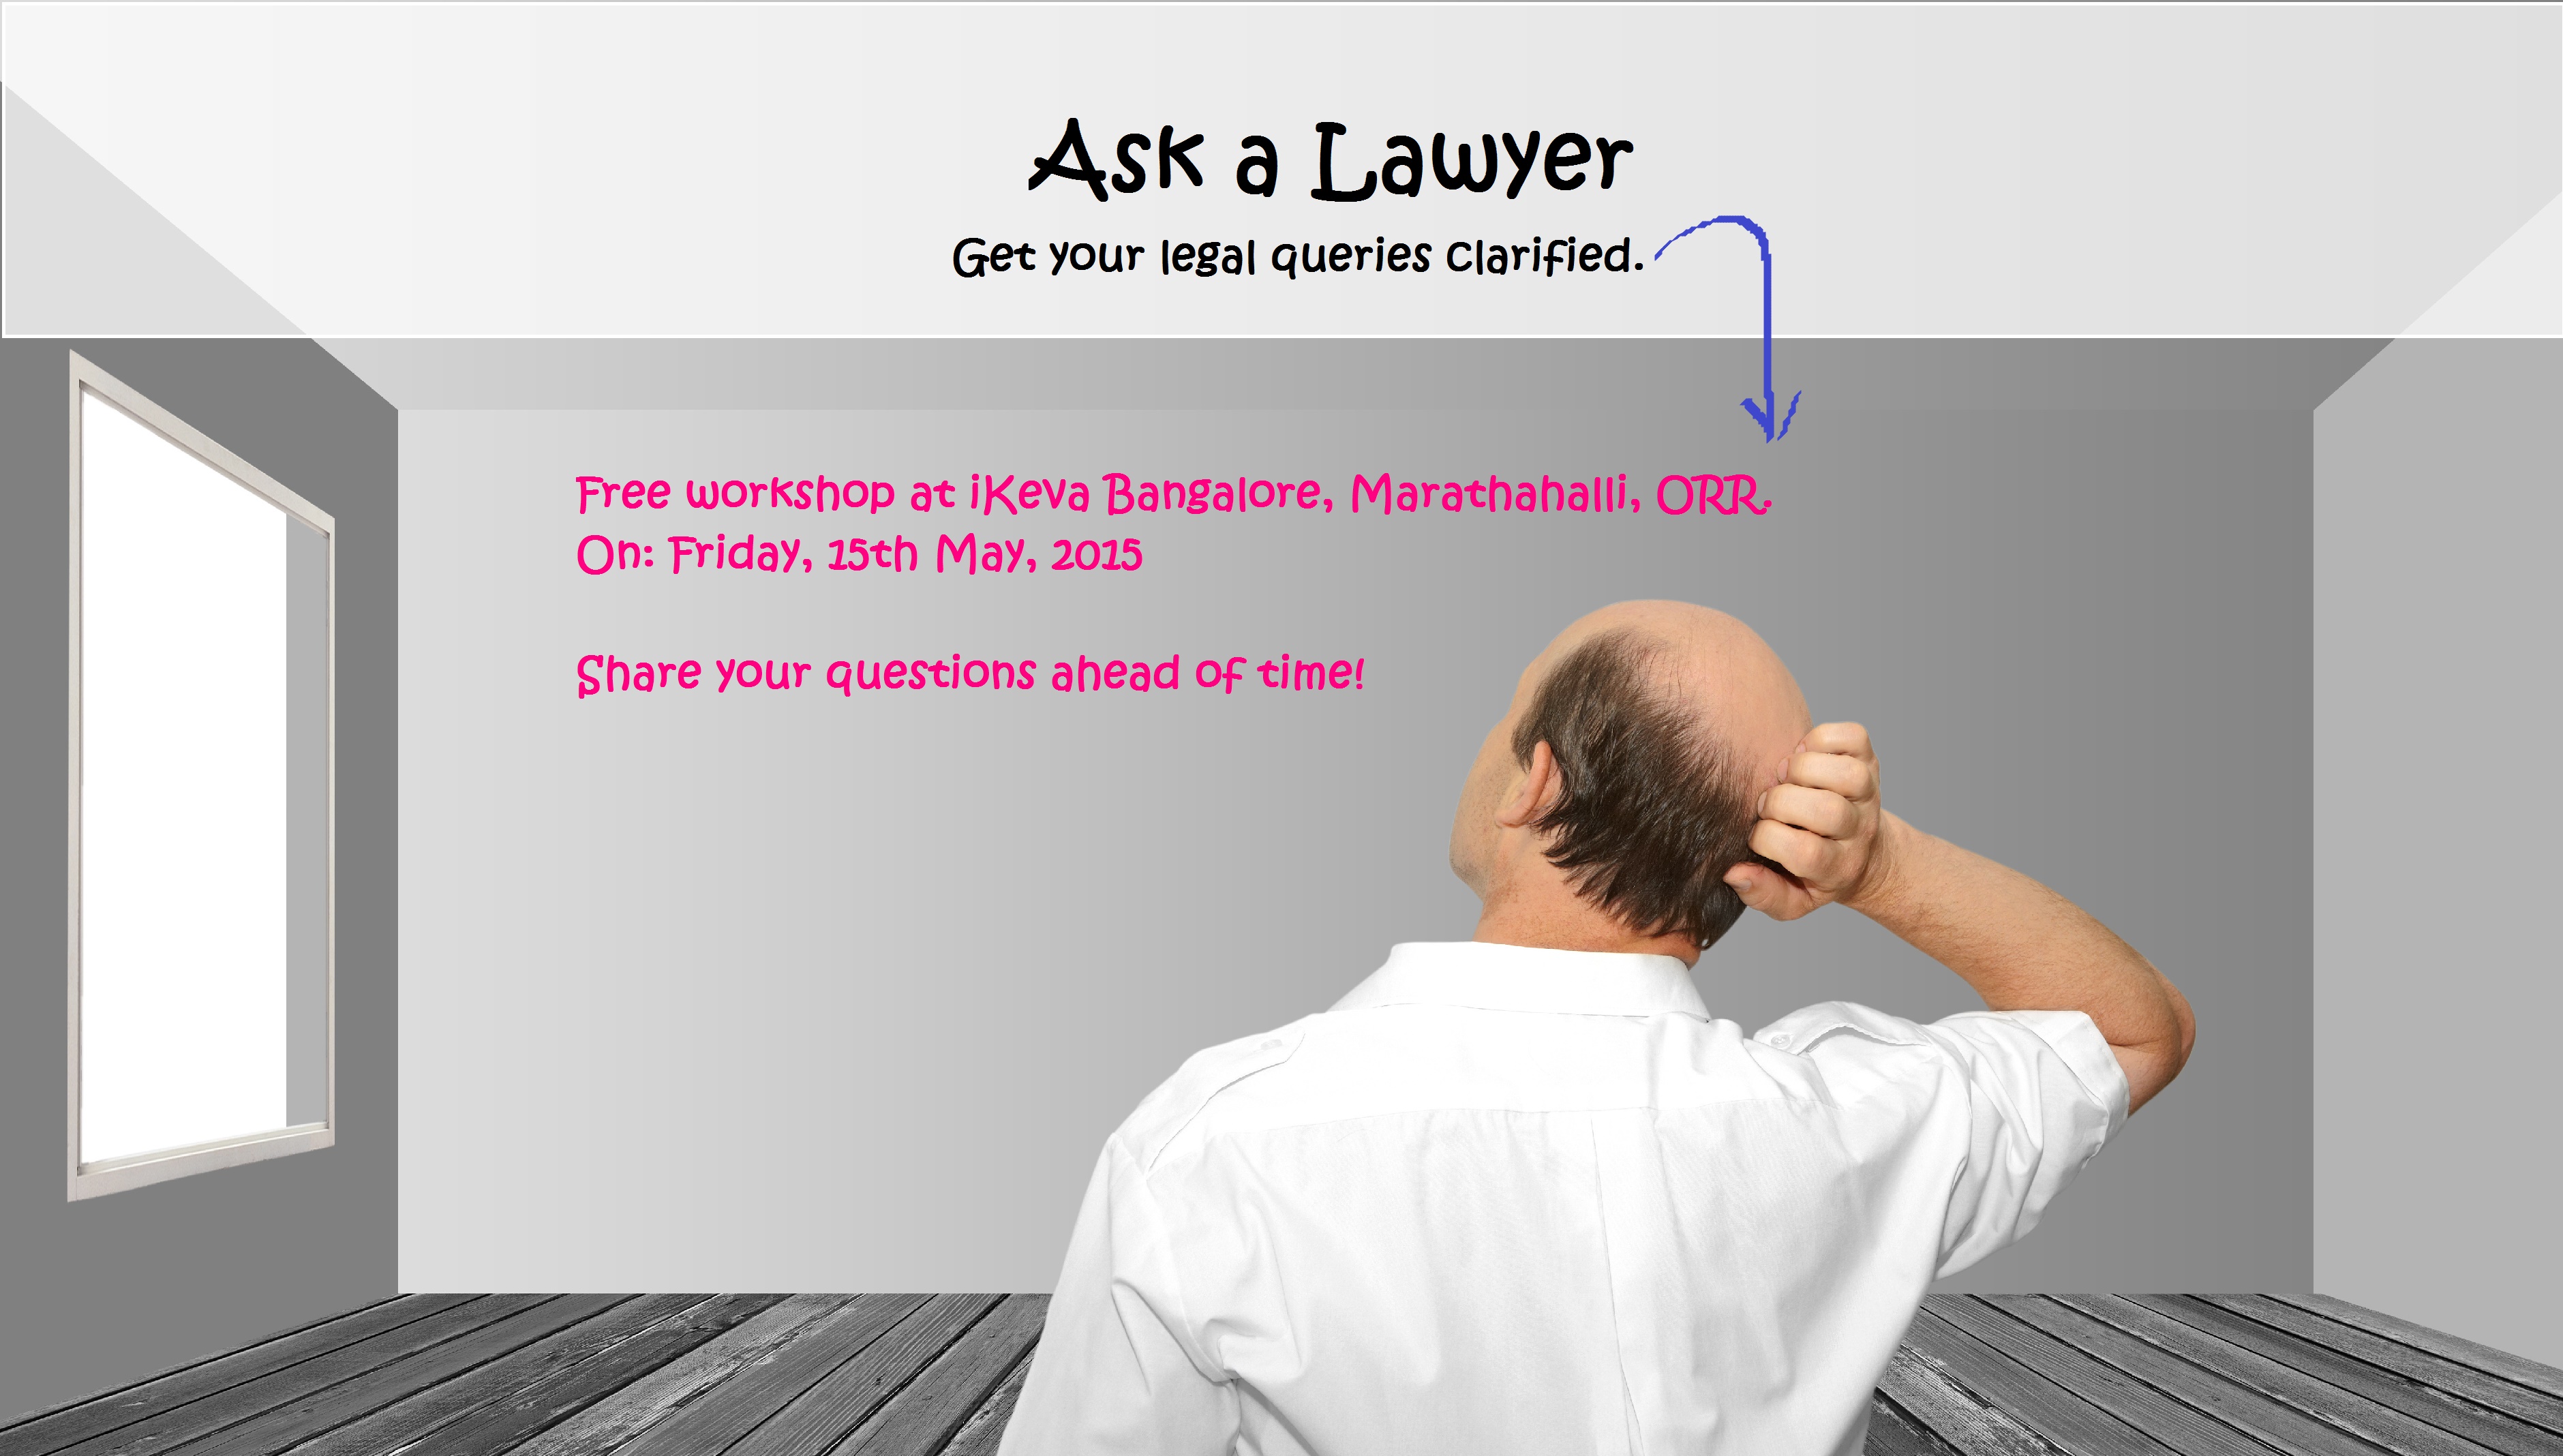 Where can you ask legal questions to real lawyers for free?